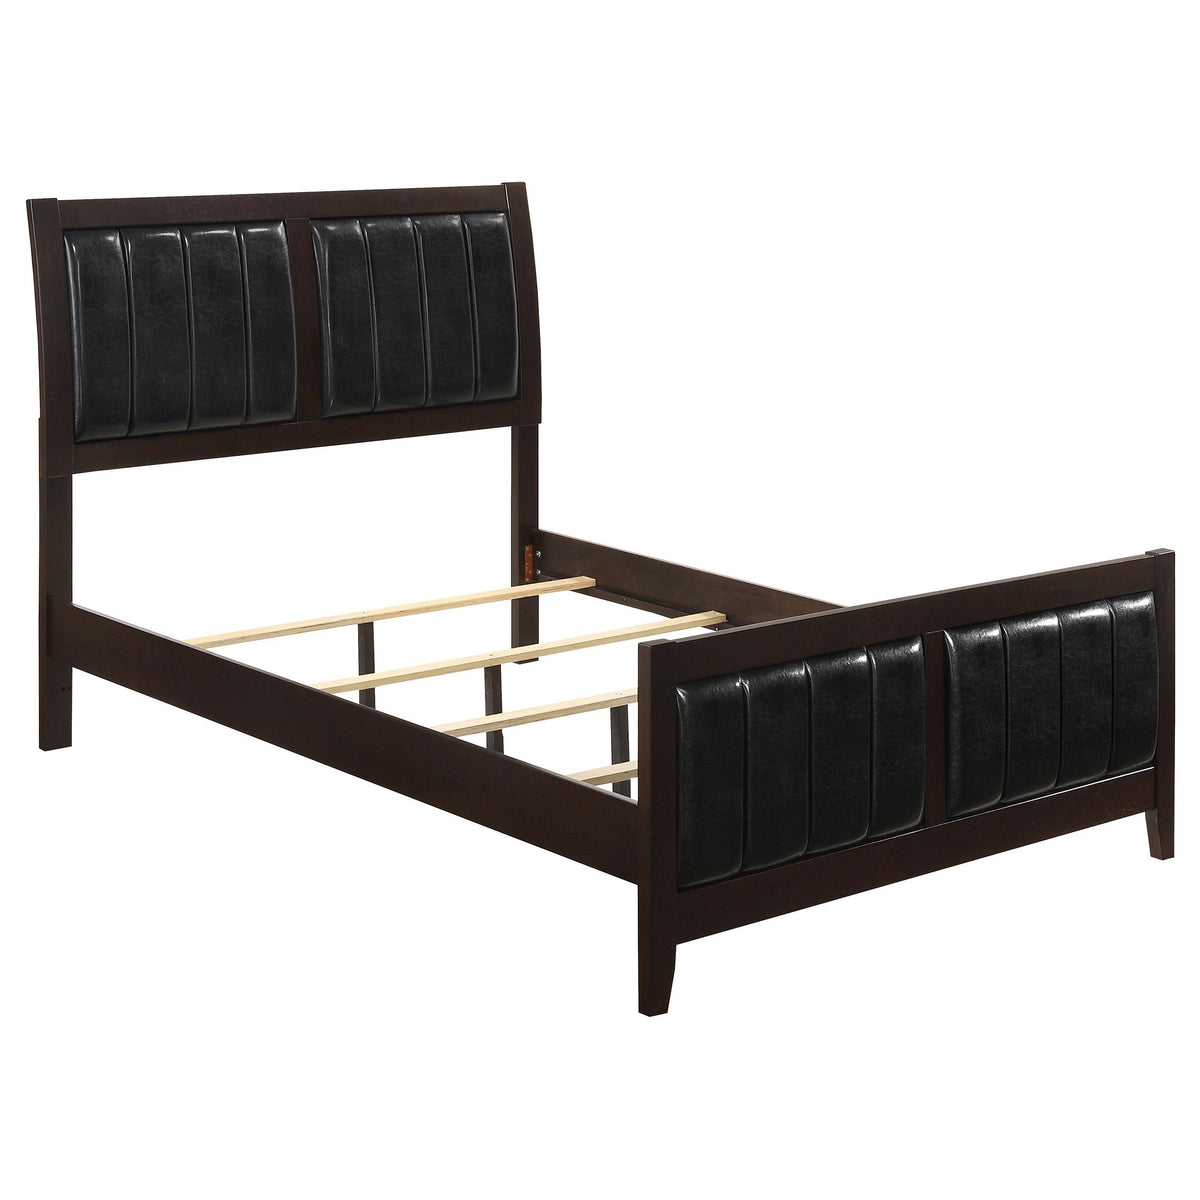 Carlton Eastern King Upholstered Bed Cappuccino and Black  Las Vegas Furniture Stores